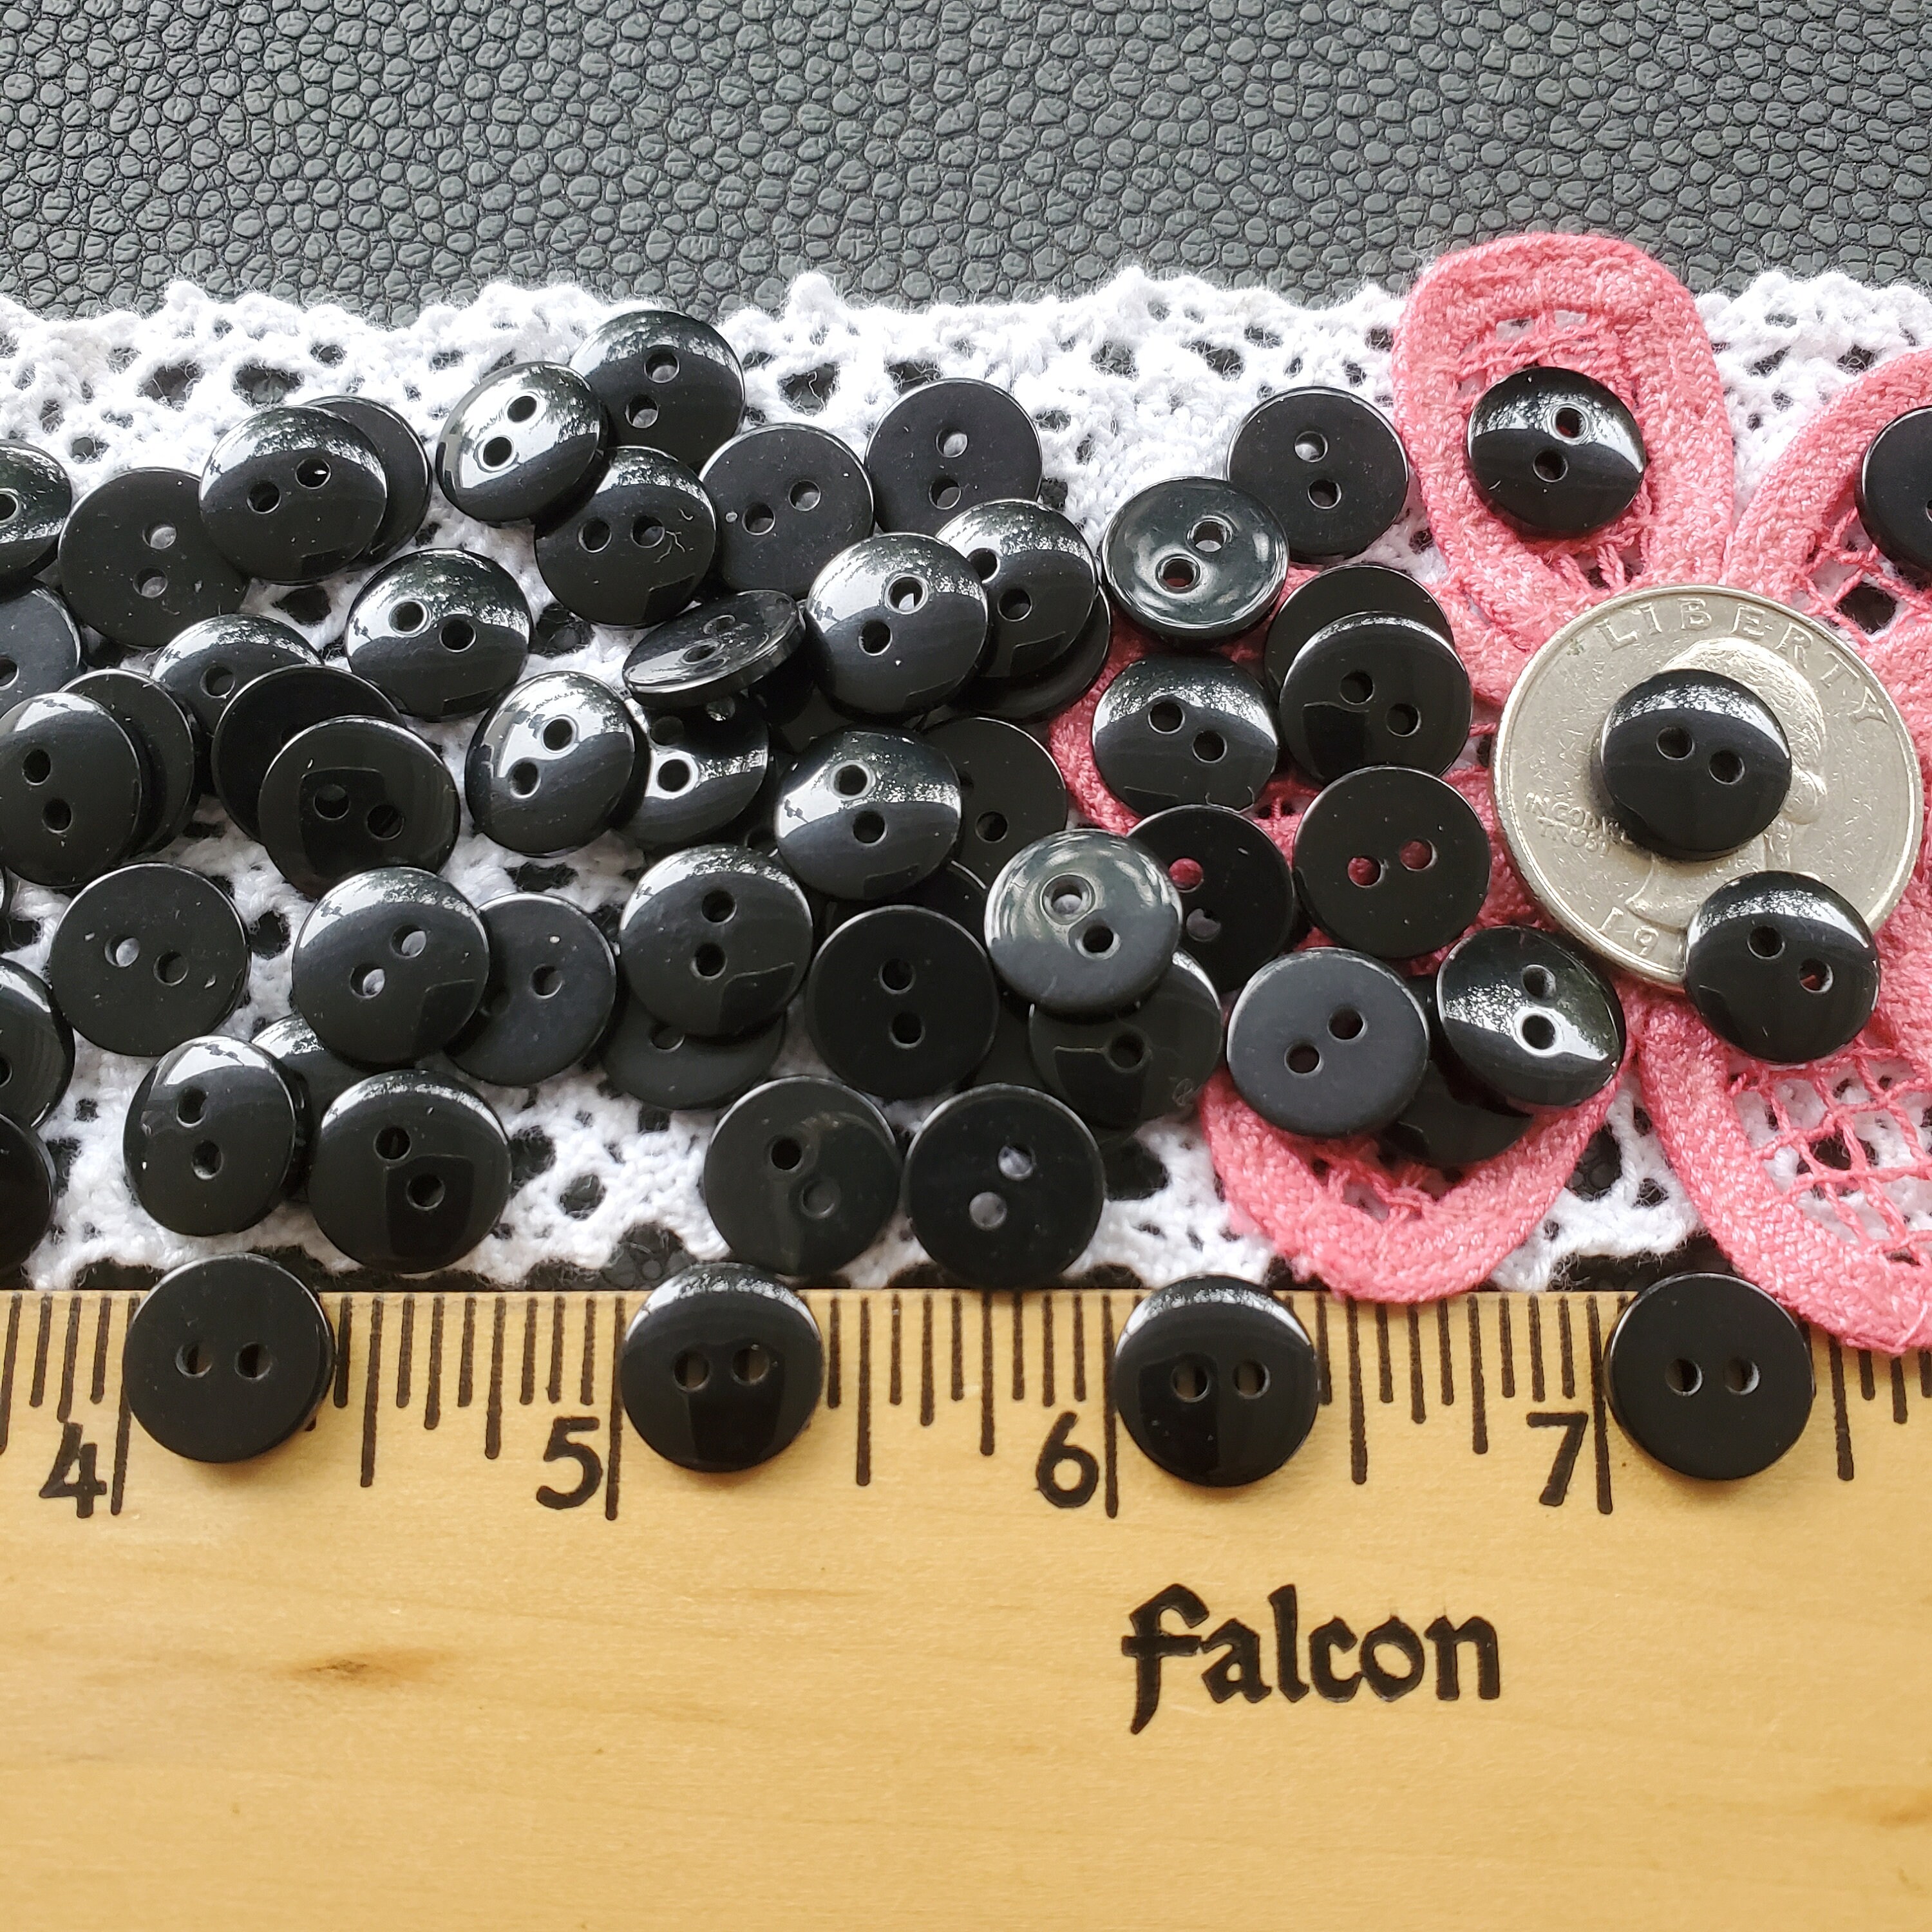 7/16 Inch Black Matte Buttons for Raggedy Cloth Dolls and Craft